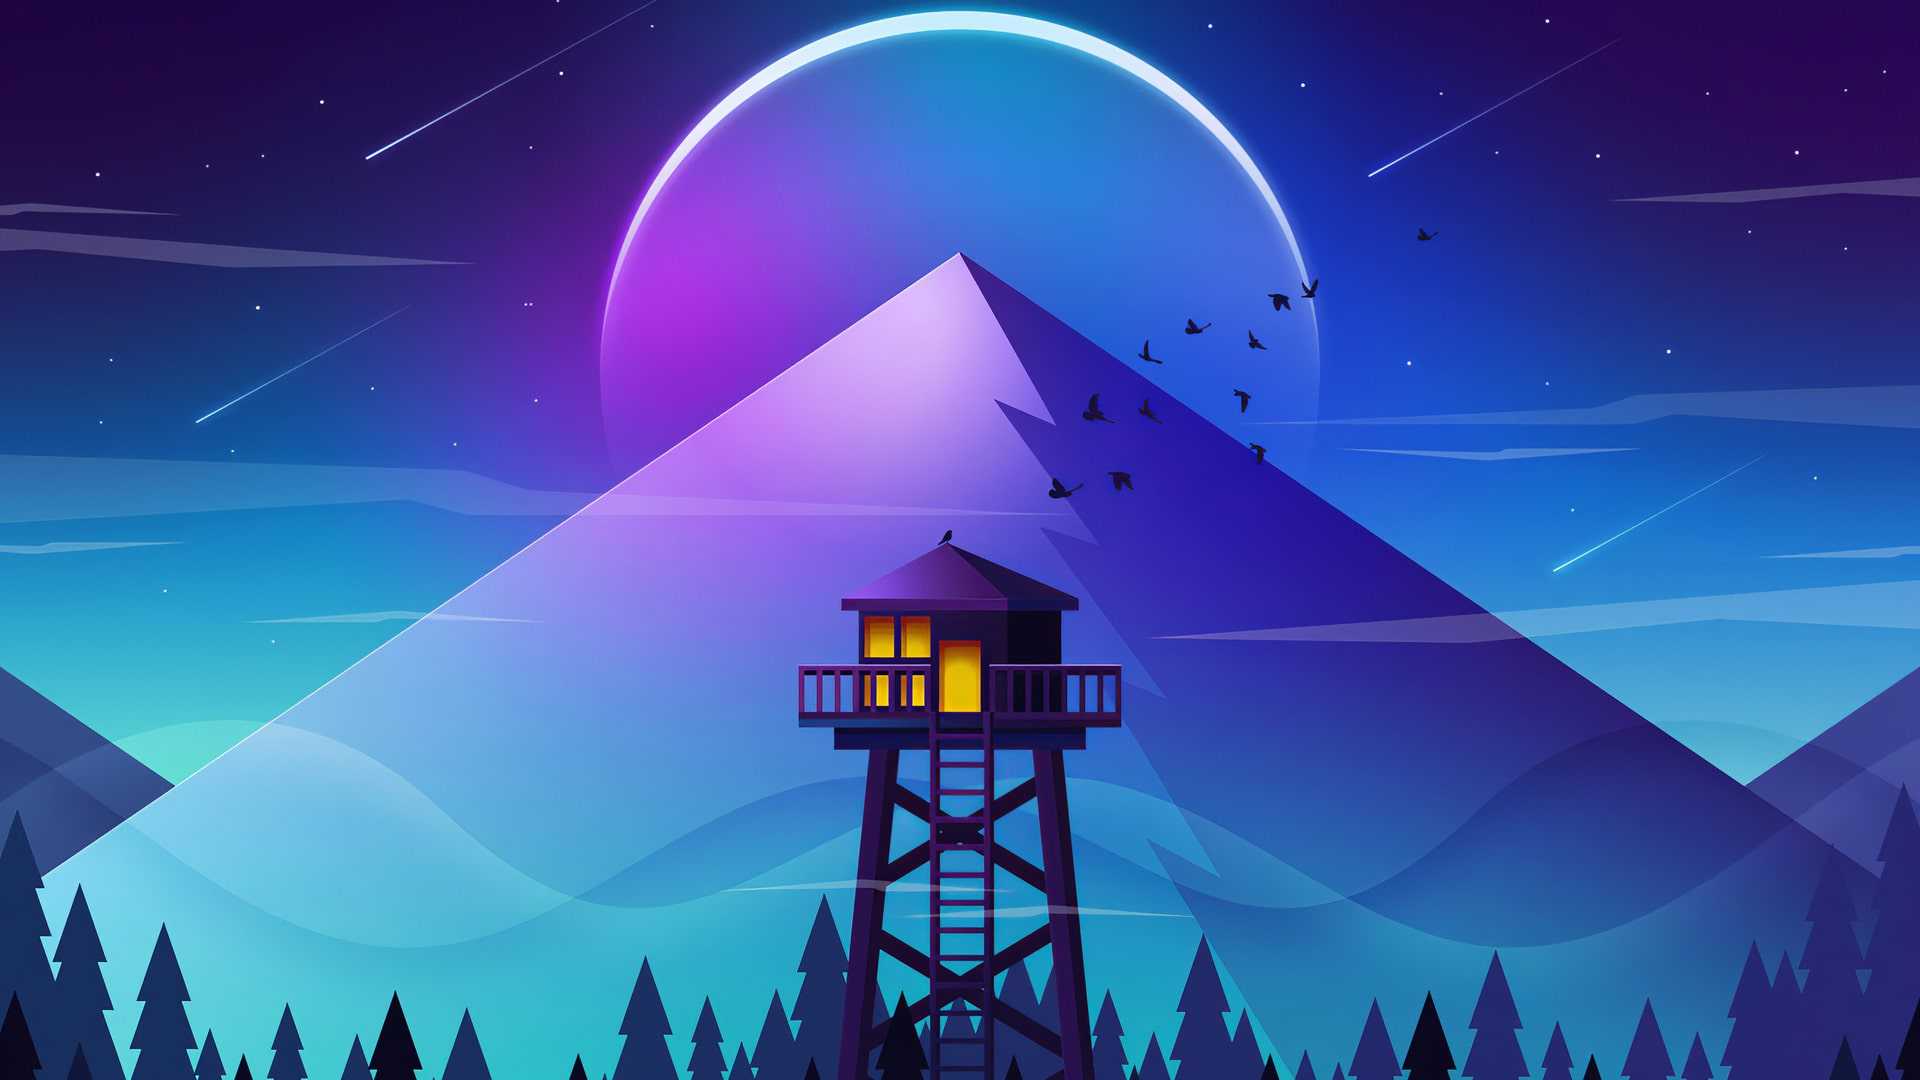 Hd Firewatch Wallpapers Kolpaper Awesome Free Hd Wallpapers